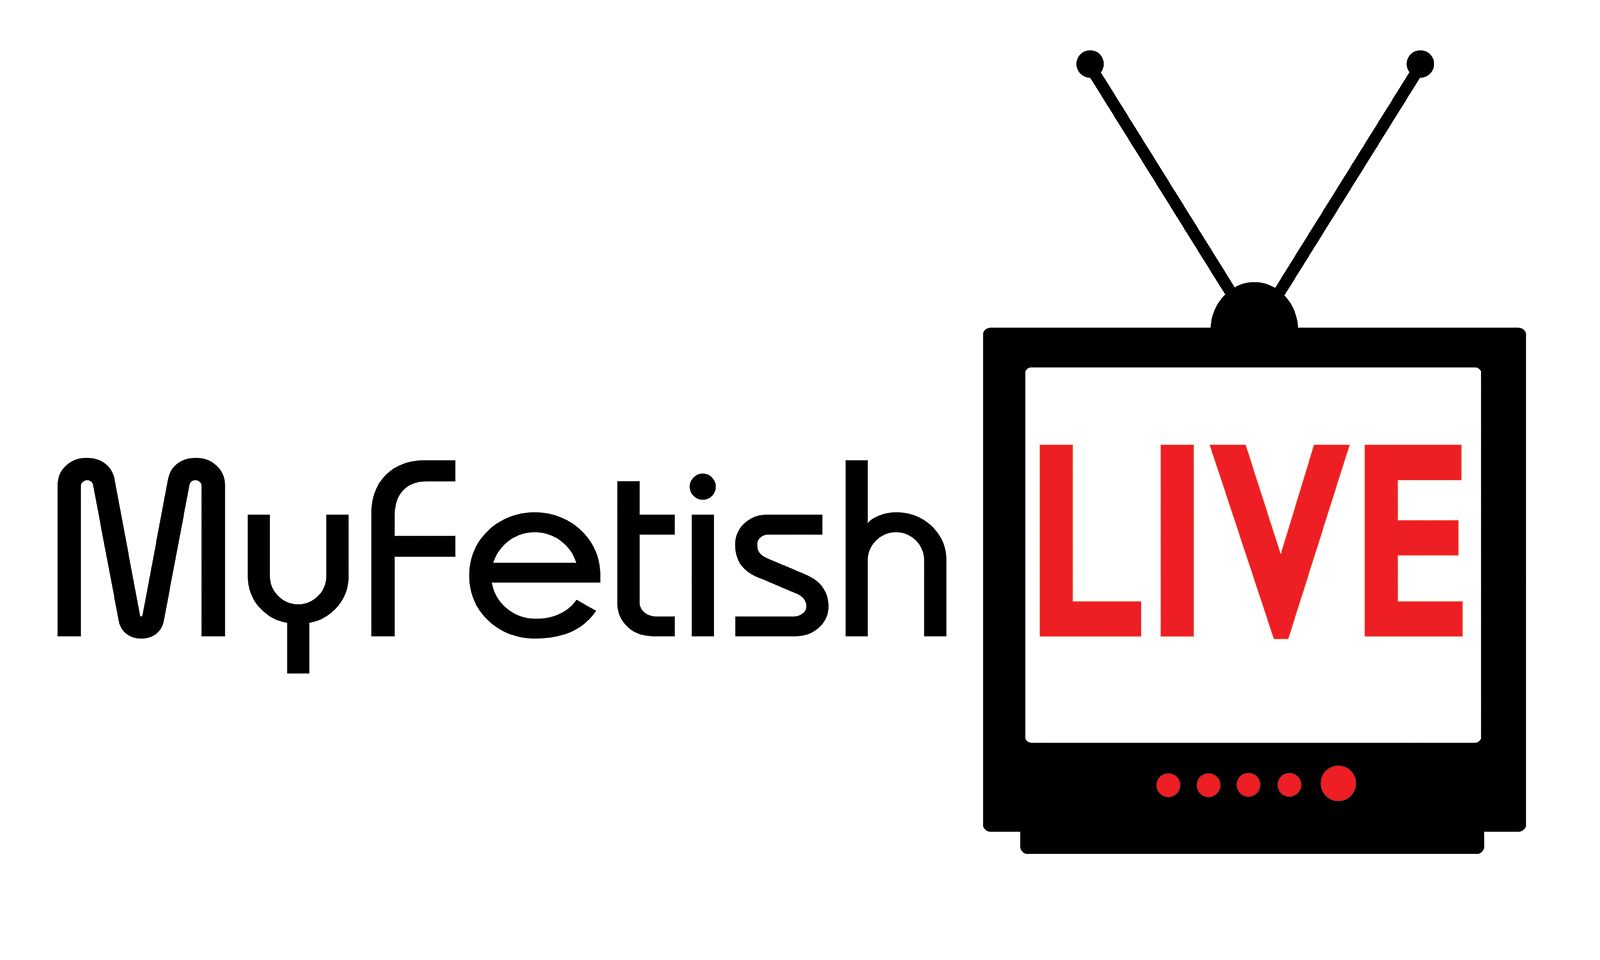 MyFetishLive Takes Boutique Approach With Esoteric Content